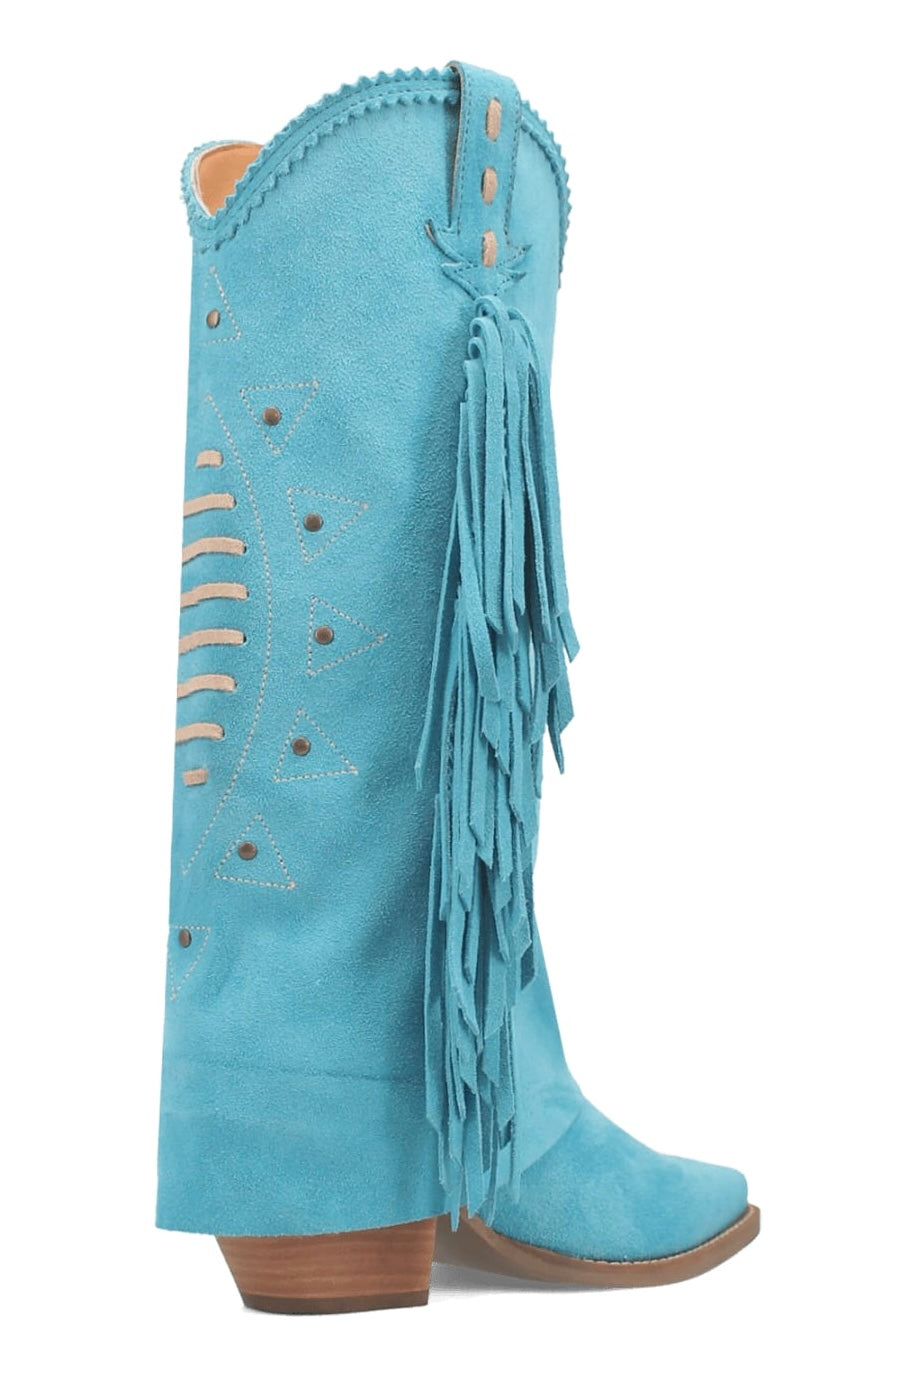 Spirit Trail Leather Boot in Blue